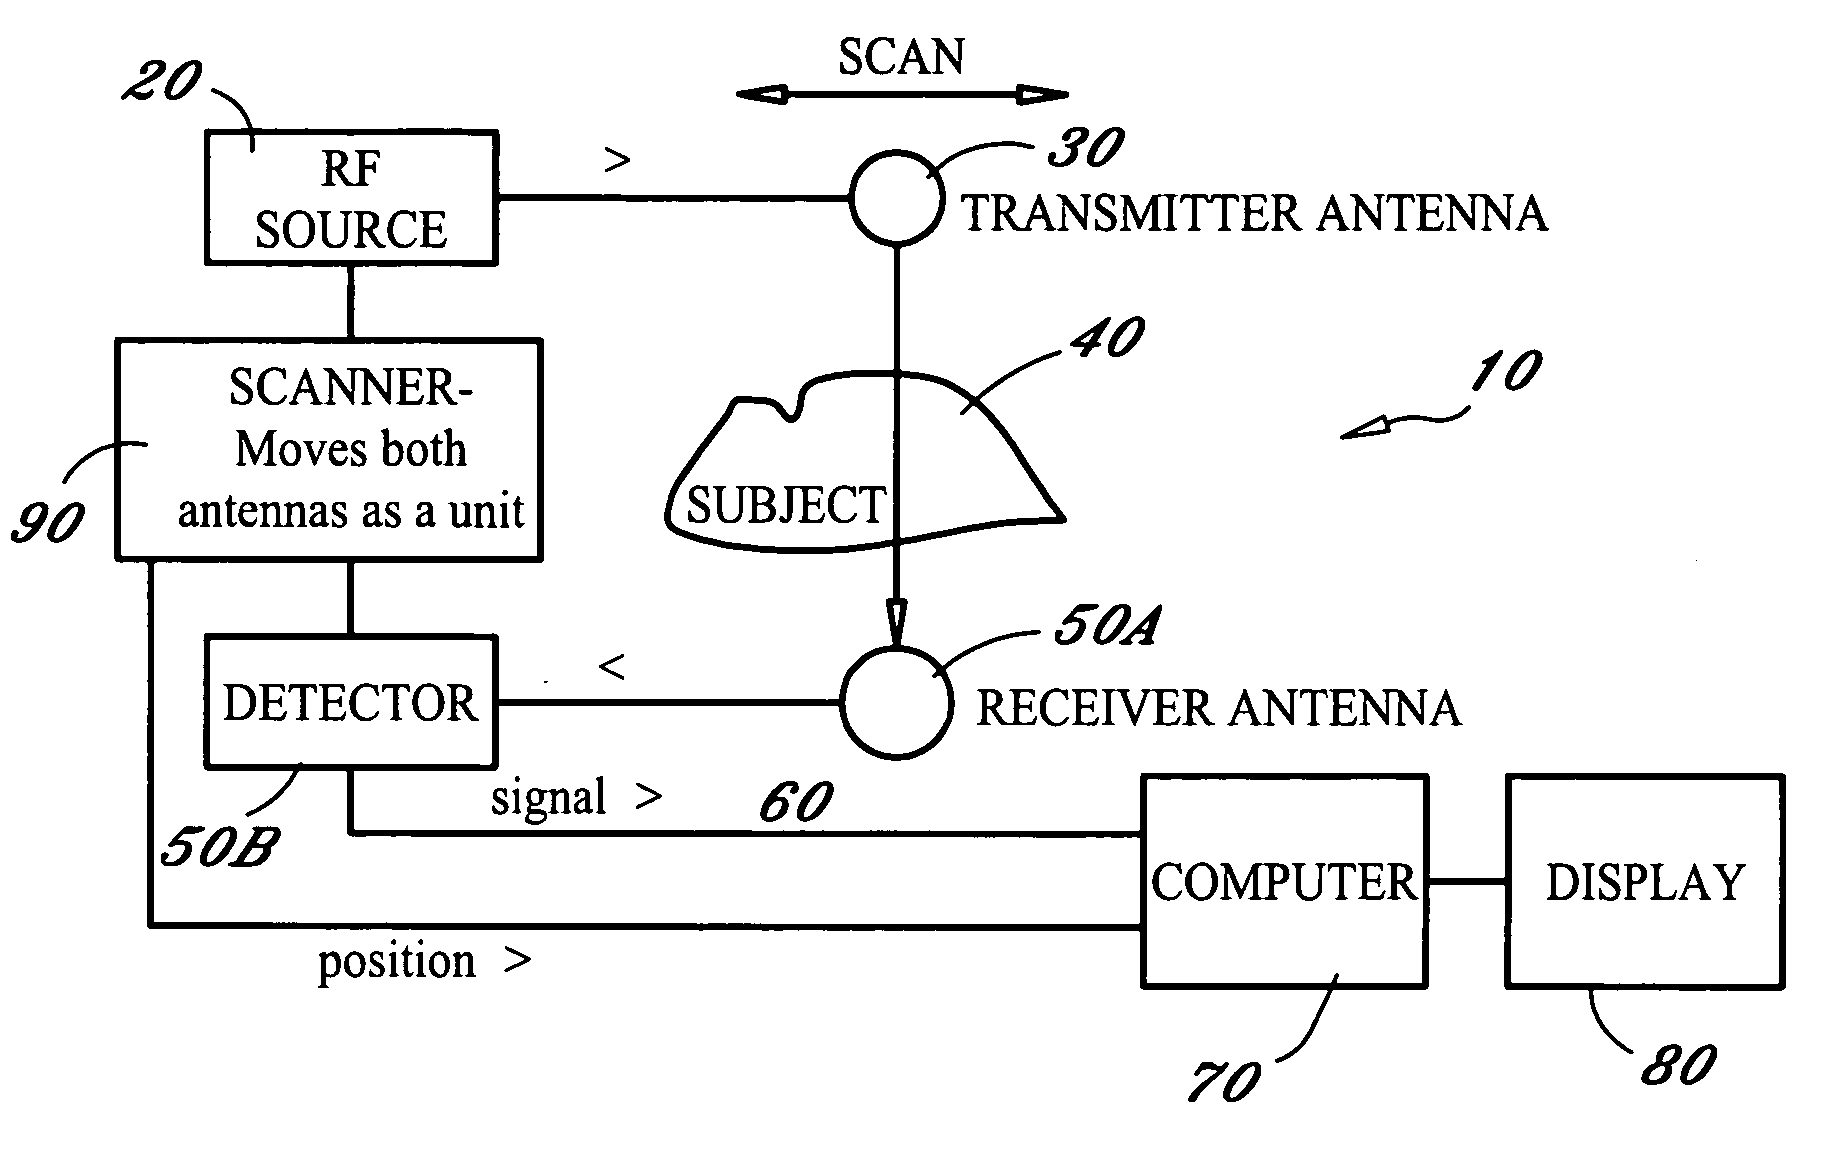 Radio-frequency imaging system for medical and other applications